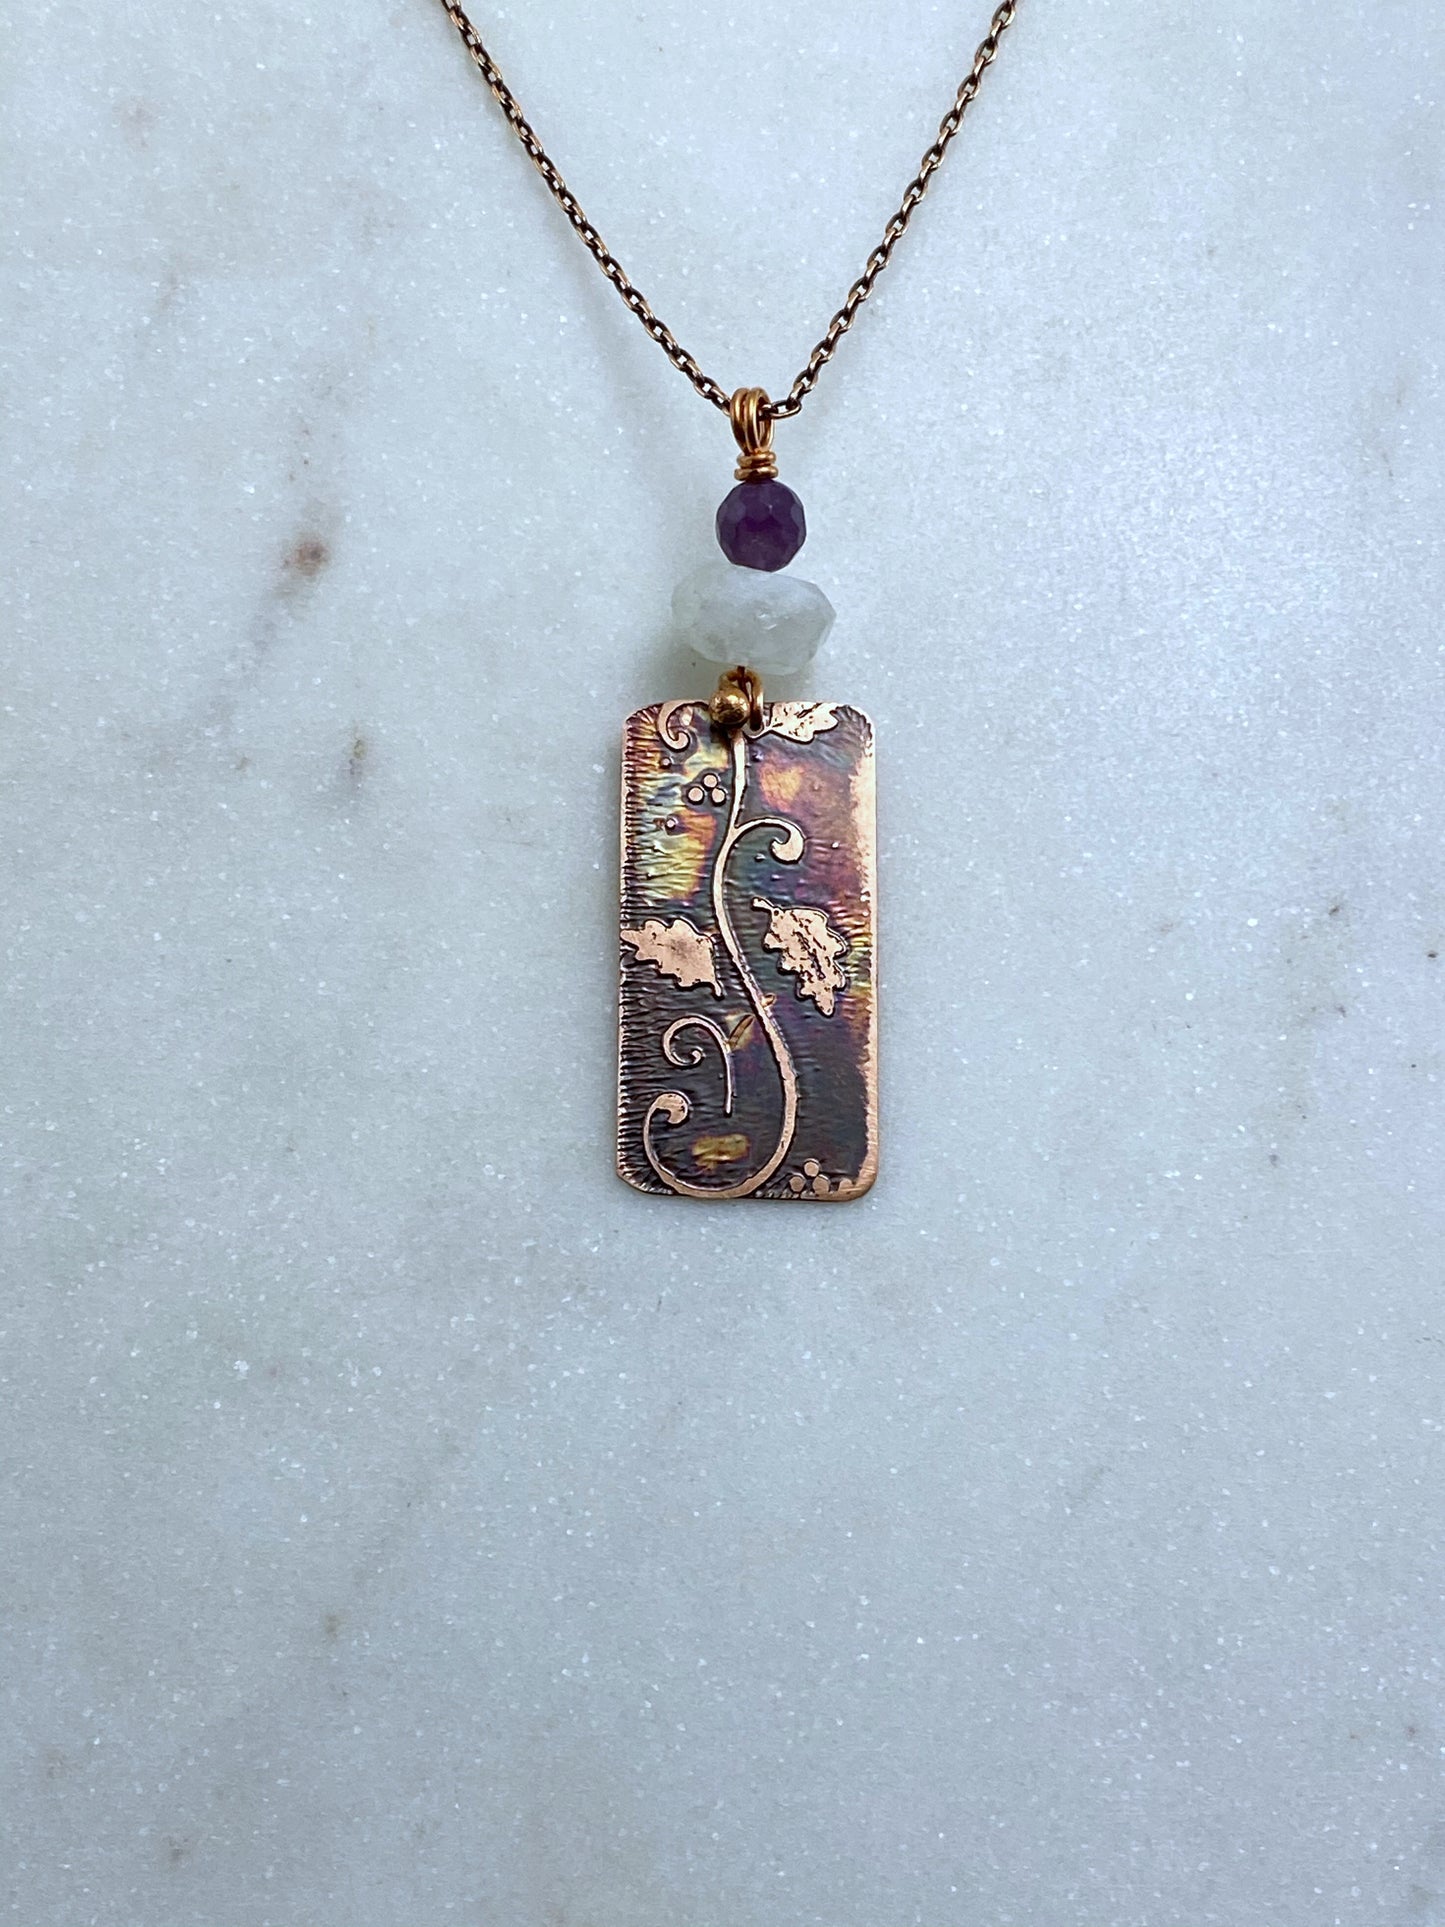 Acid etched copper swirl necklace with amethyst and moonstone